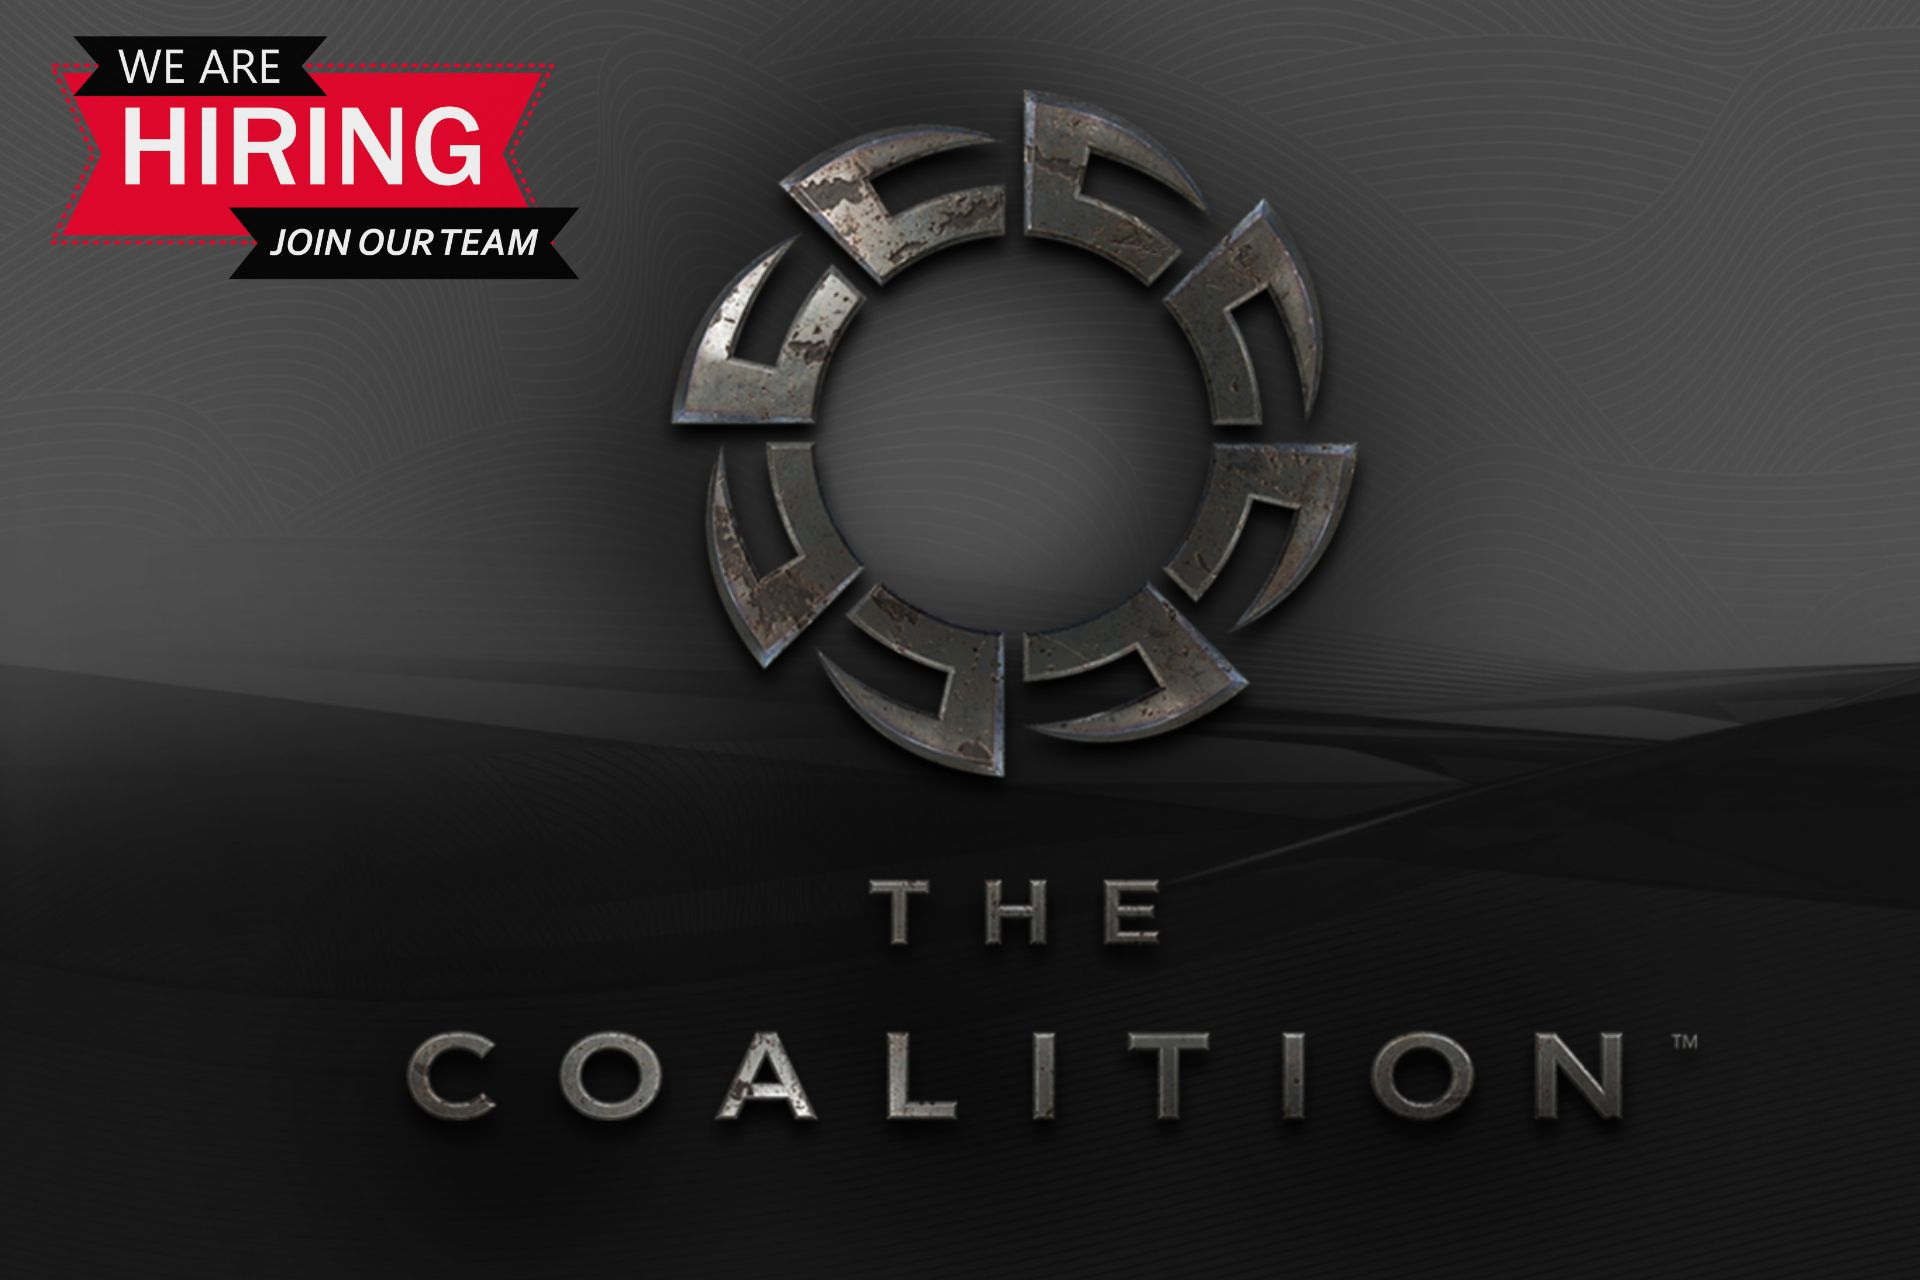 The Coalition Logo on a Gray Background with a Hiring Message